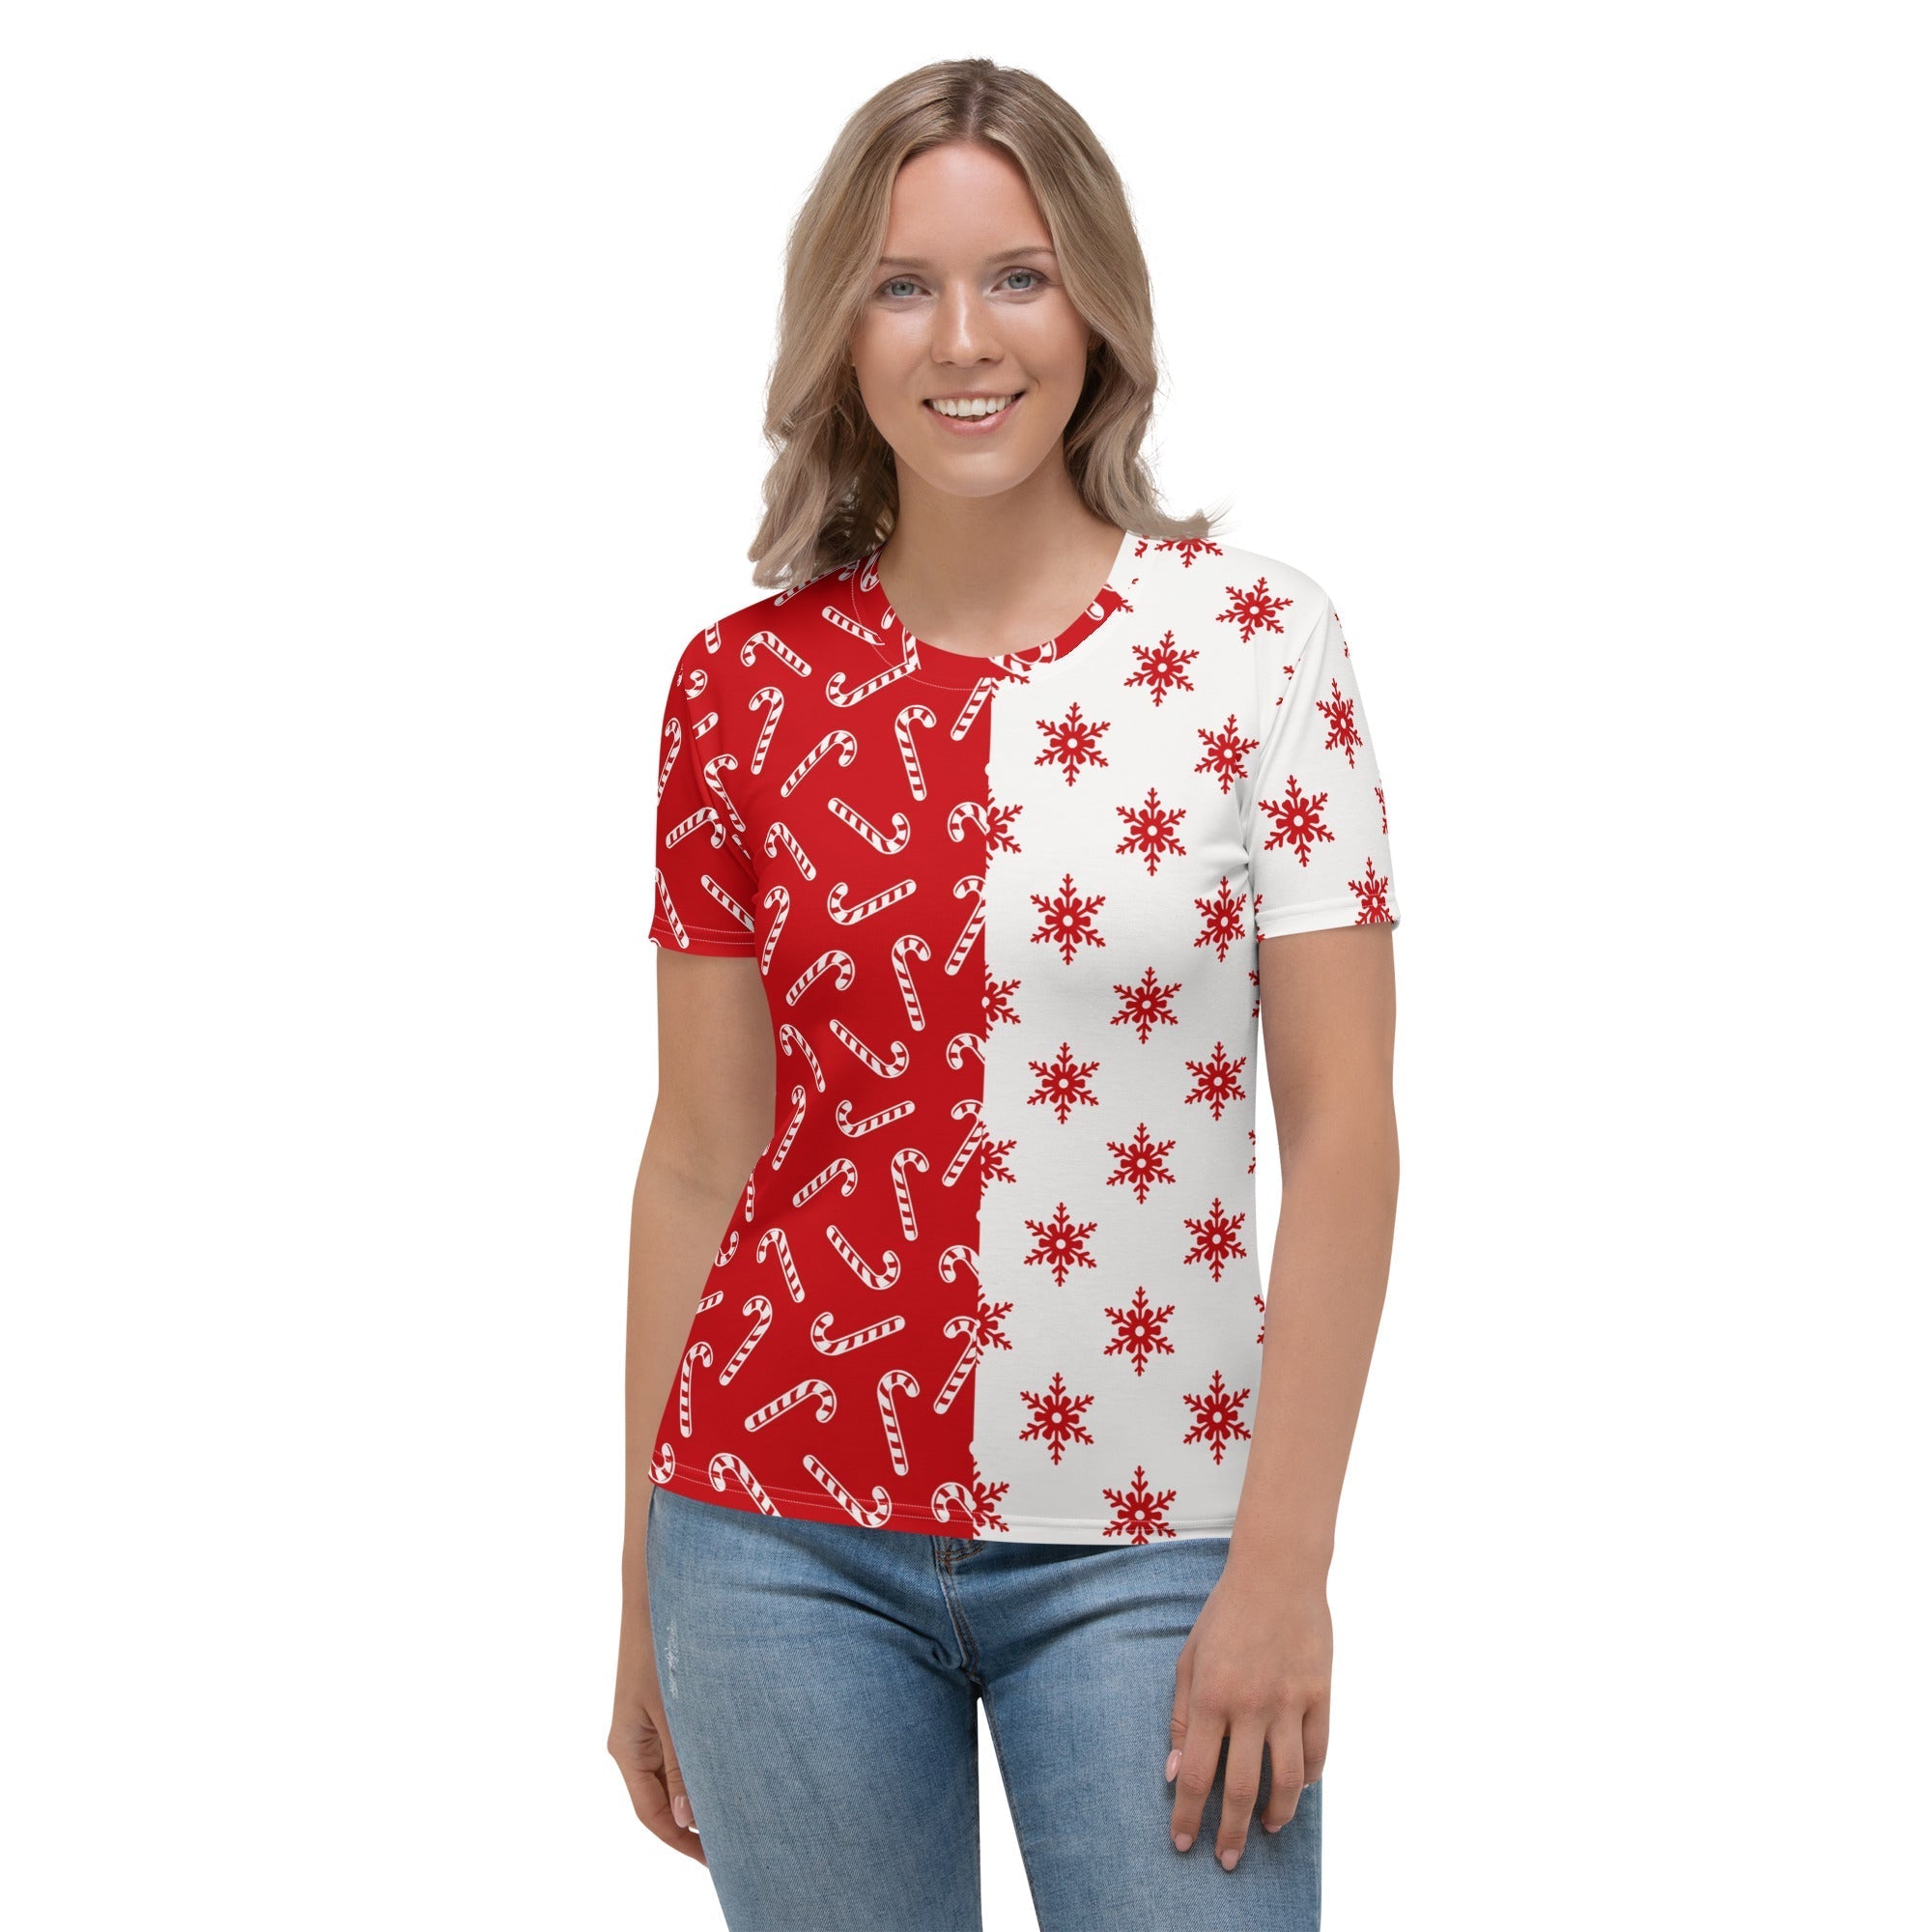 Two Patterned Christmas T-shirt